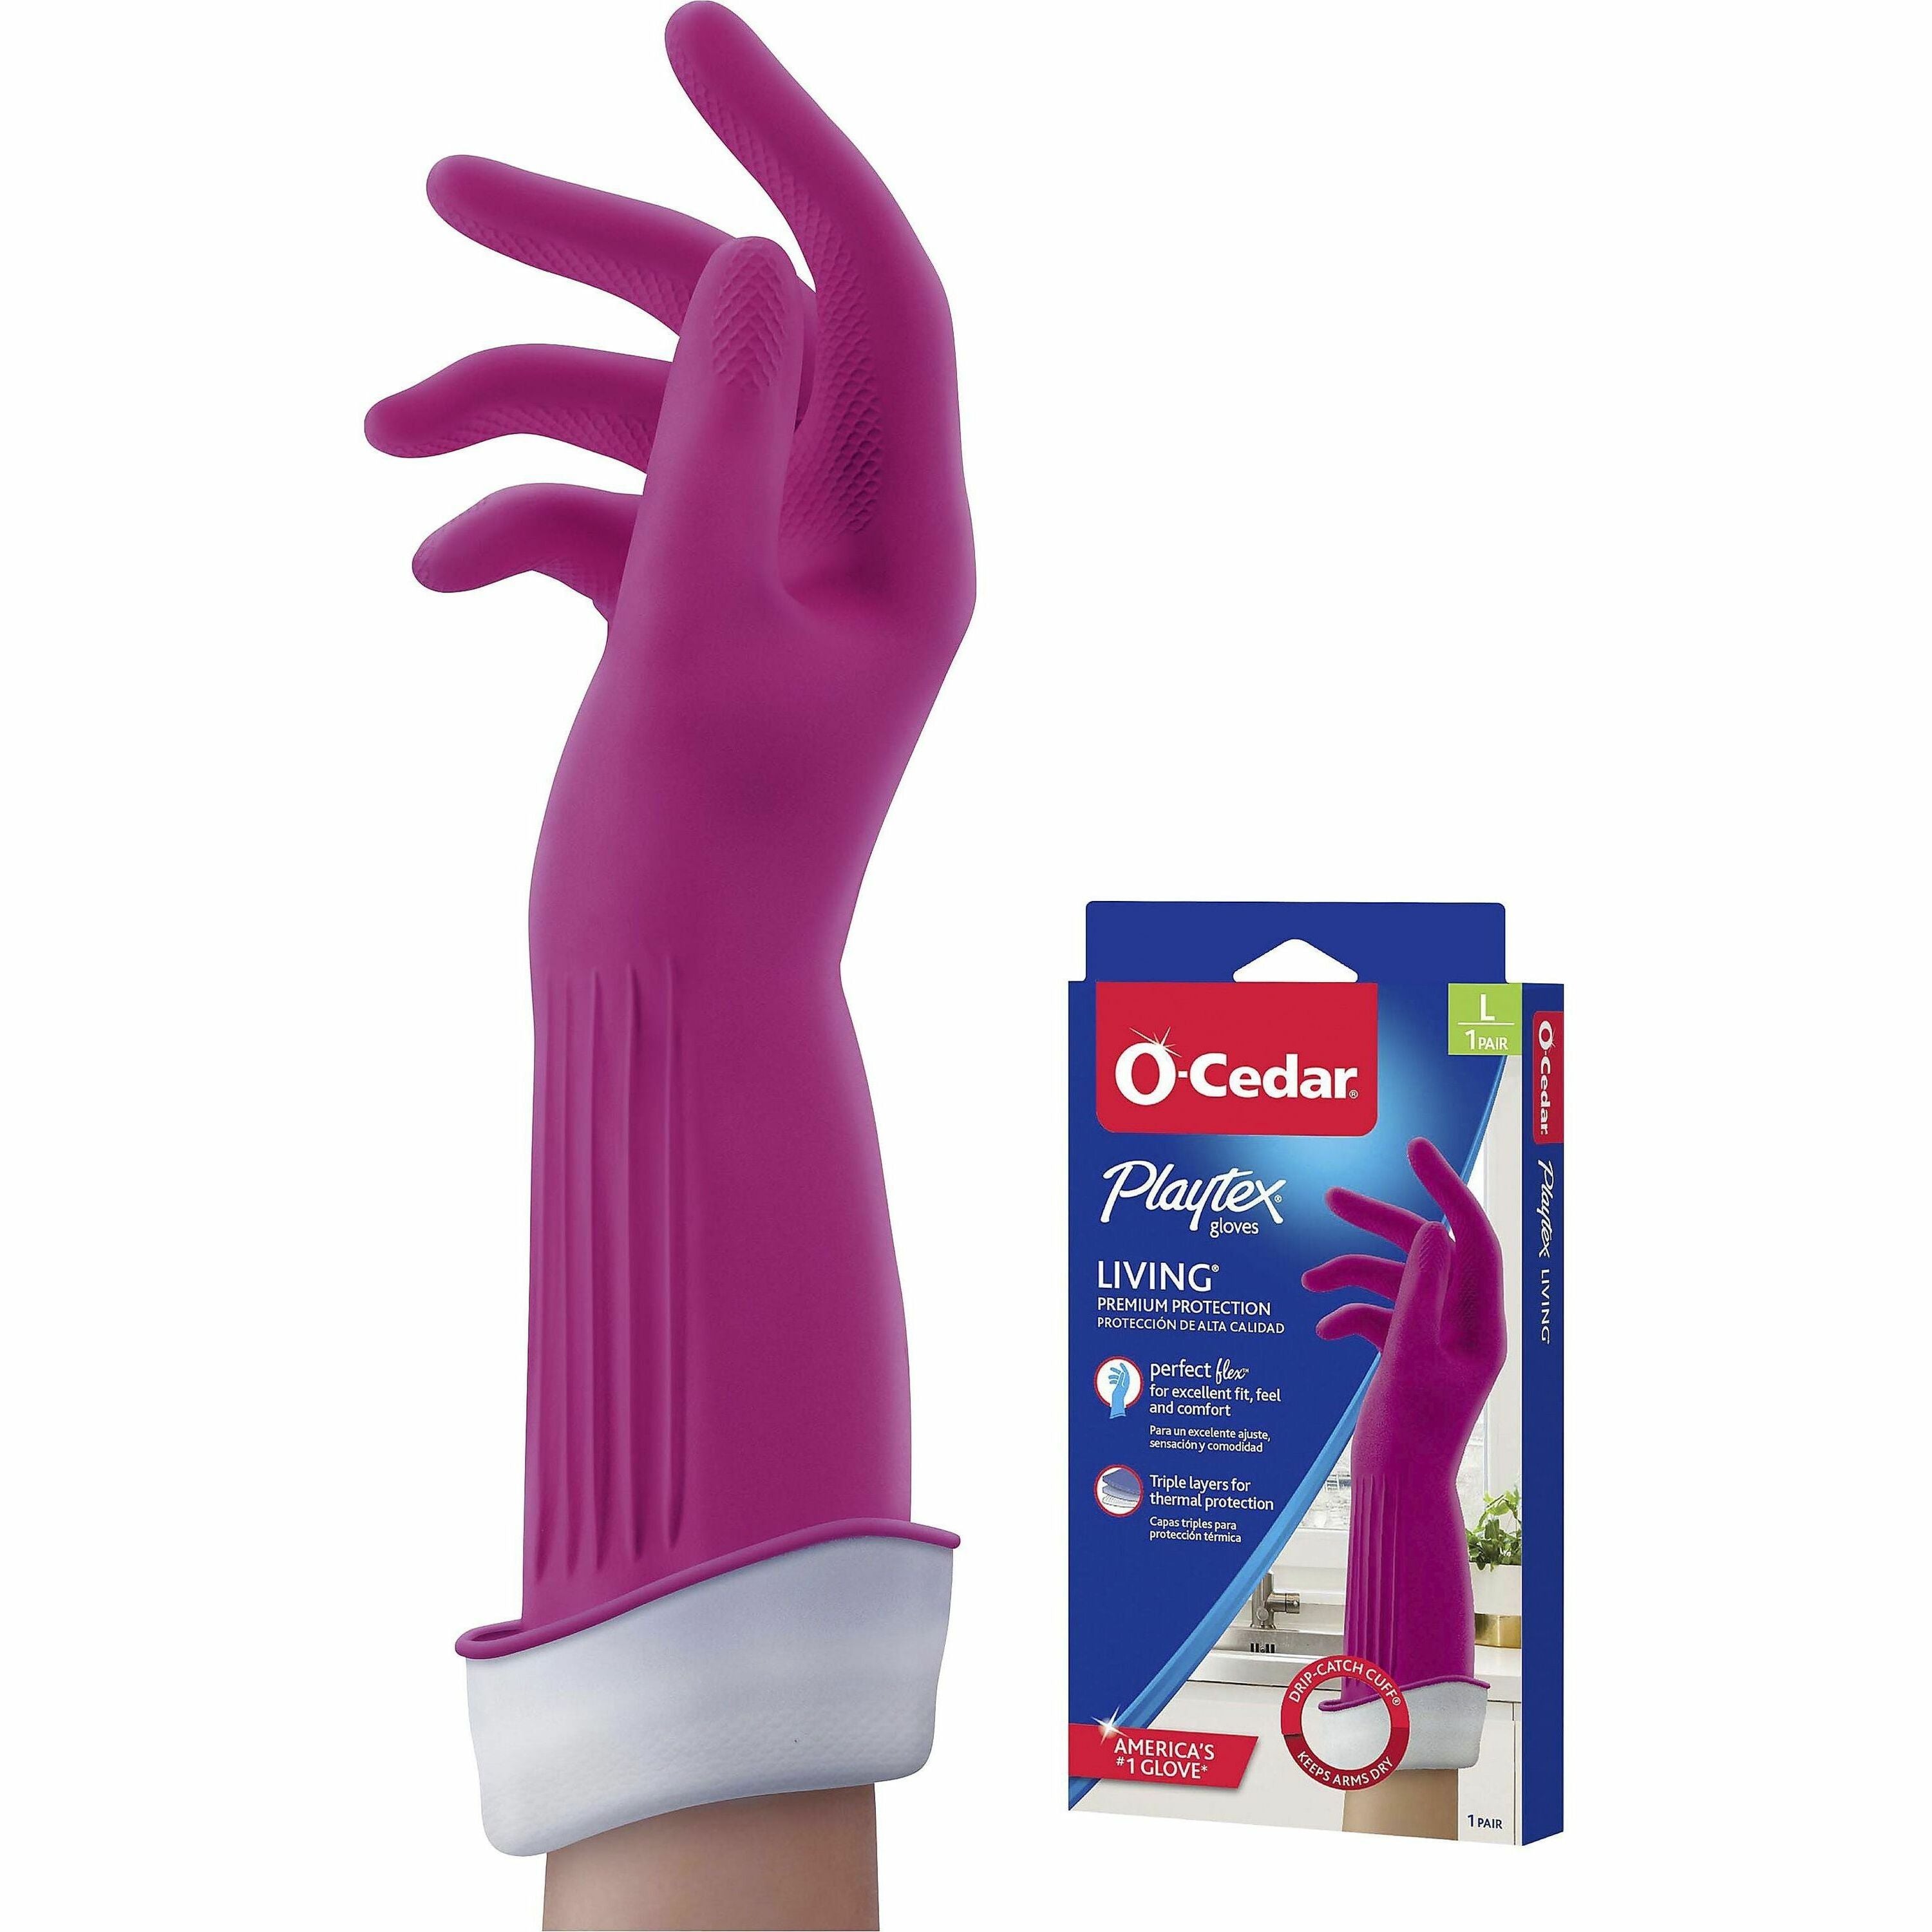 o-cedar-playtex-living-gloves-chemical-bacteria-protection-large-size-latex-neoprene-nitrile-pink-anti-microbial-reusable-durable-comfortable-odor-resistant-textured-palm-textured-fingertip-for-household-cleaning-2-pair-14_fhp166120 - 1